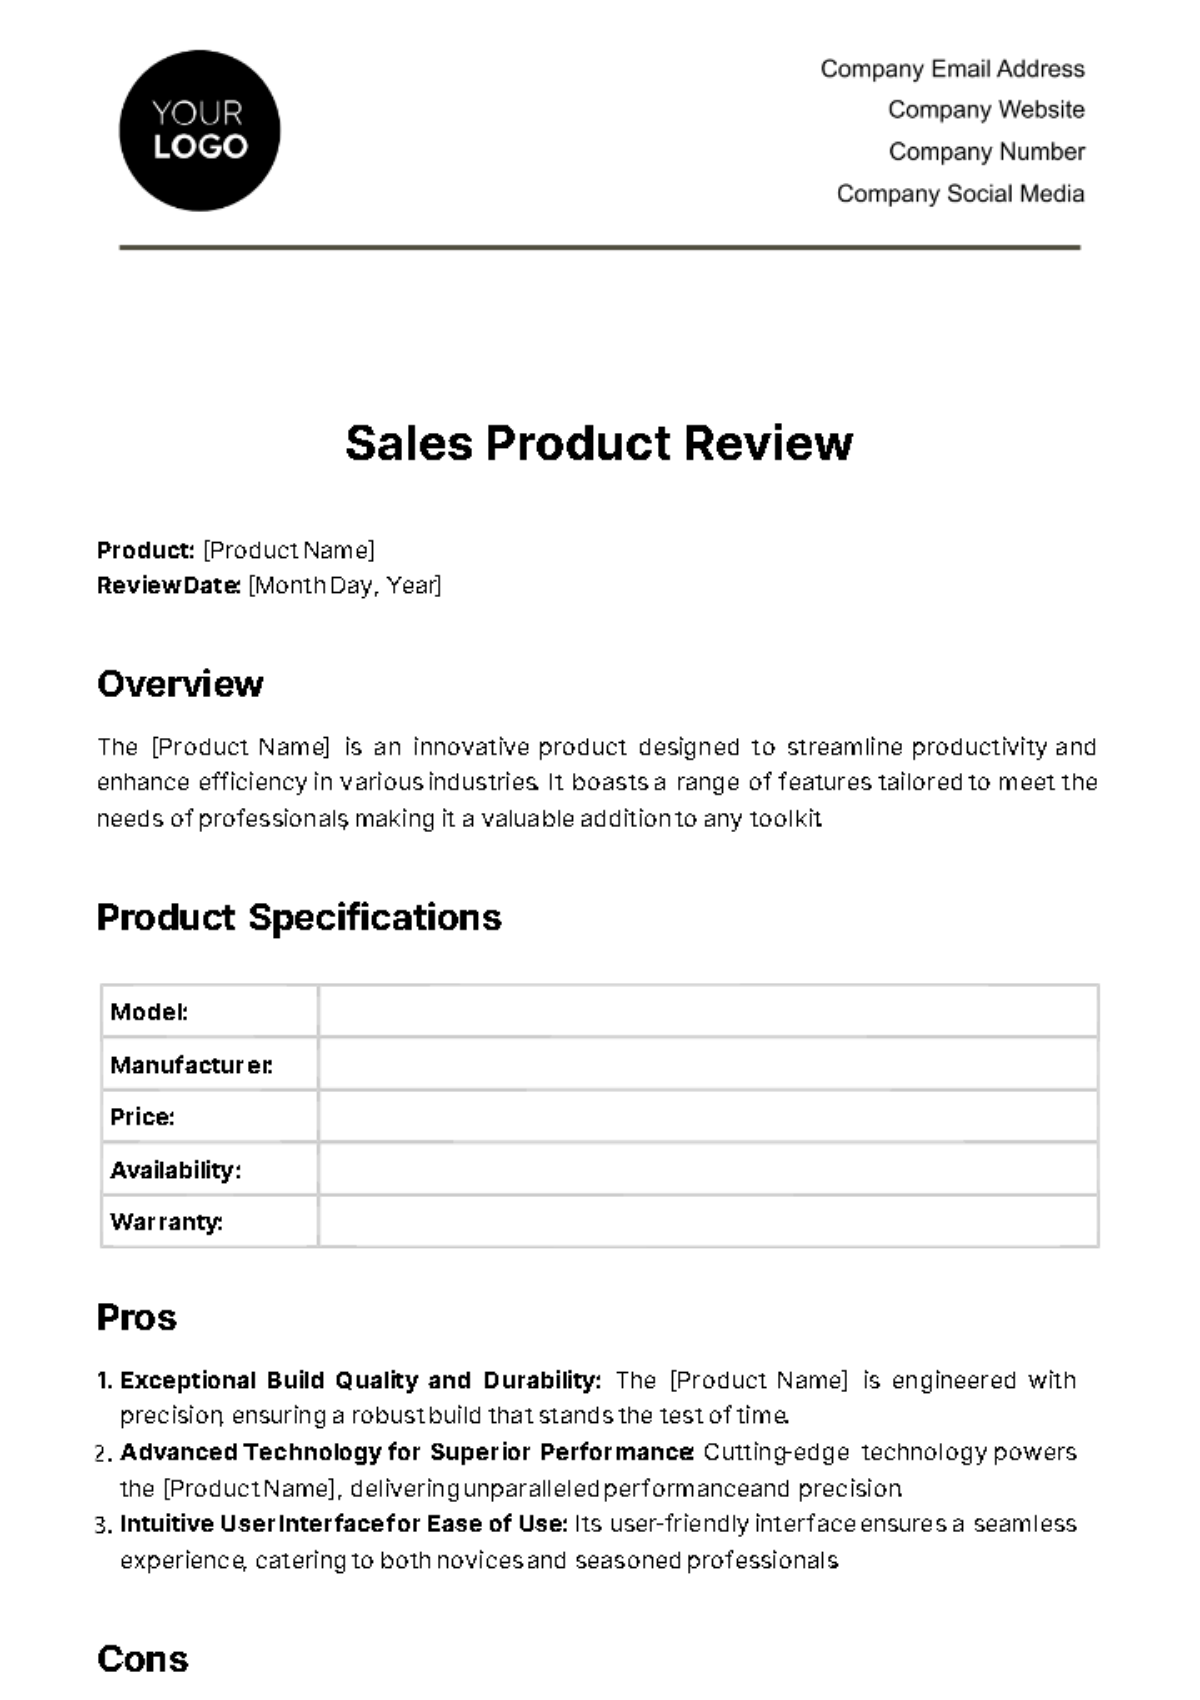 Sales Product Review Template